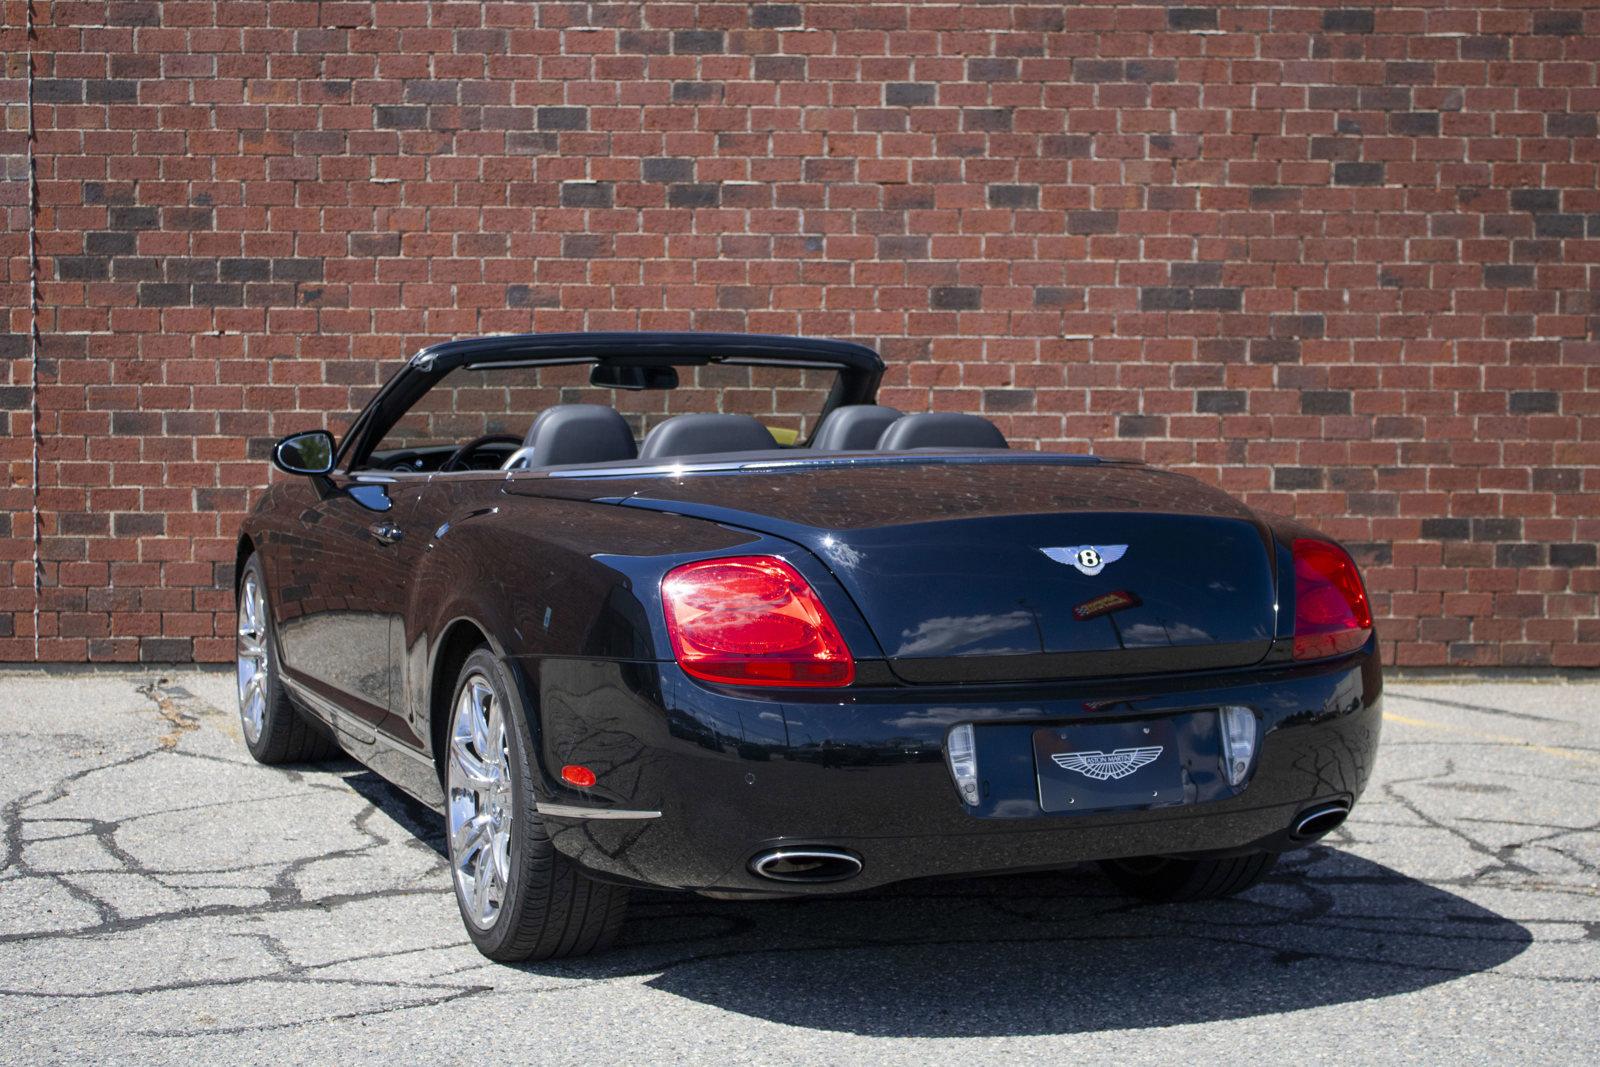 Used 2007 Bentley Continental GTC Base with VIN SCBDR33W47C047570 for sale in Norwood, MA